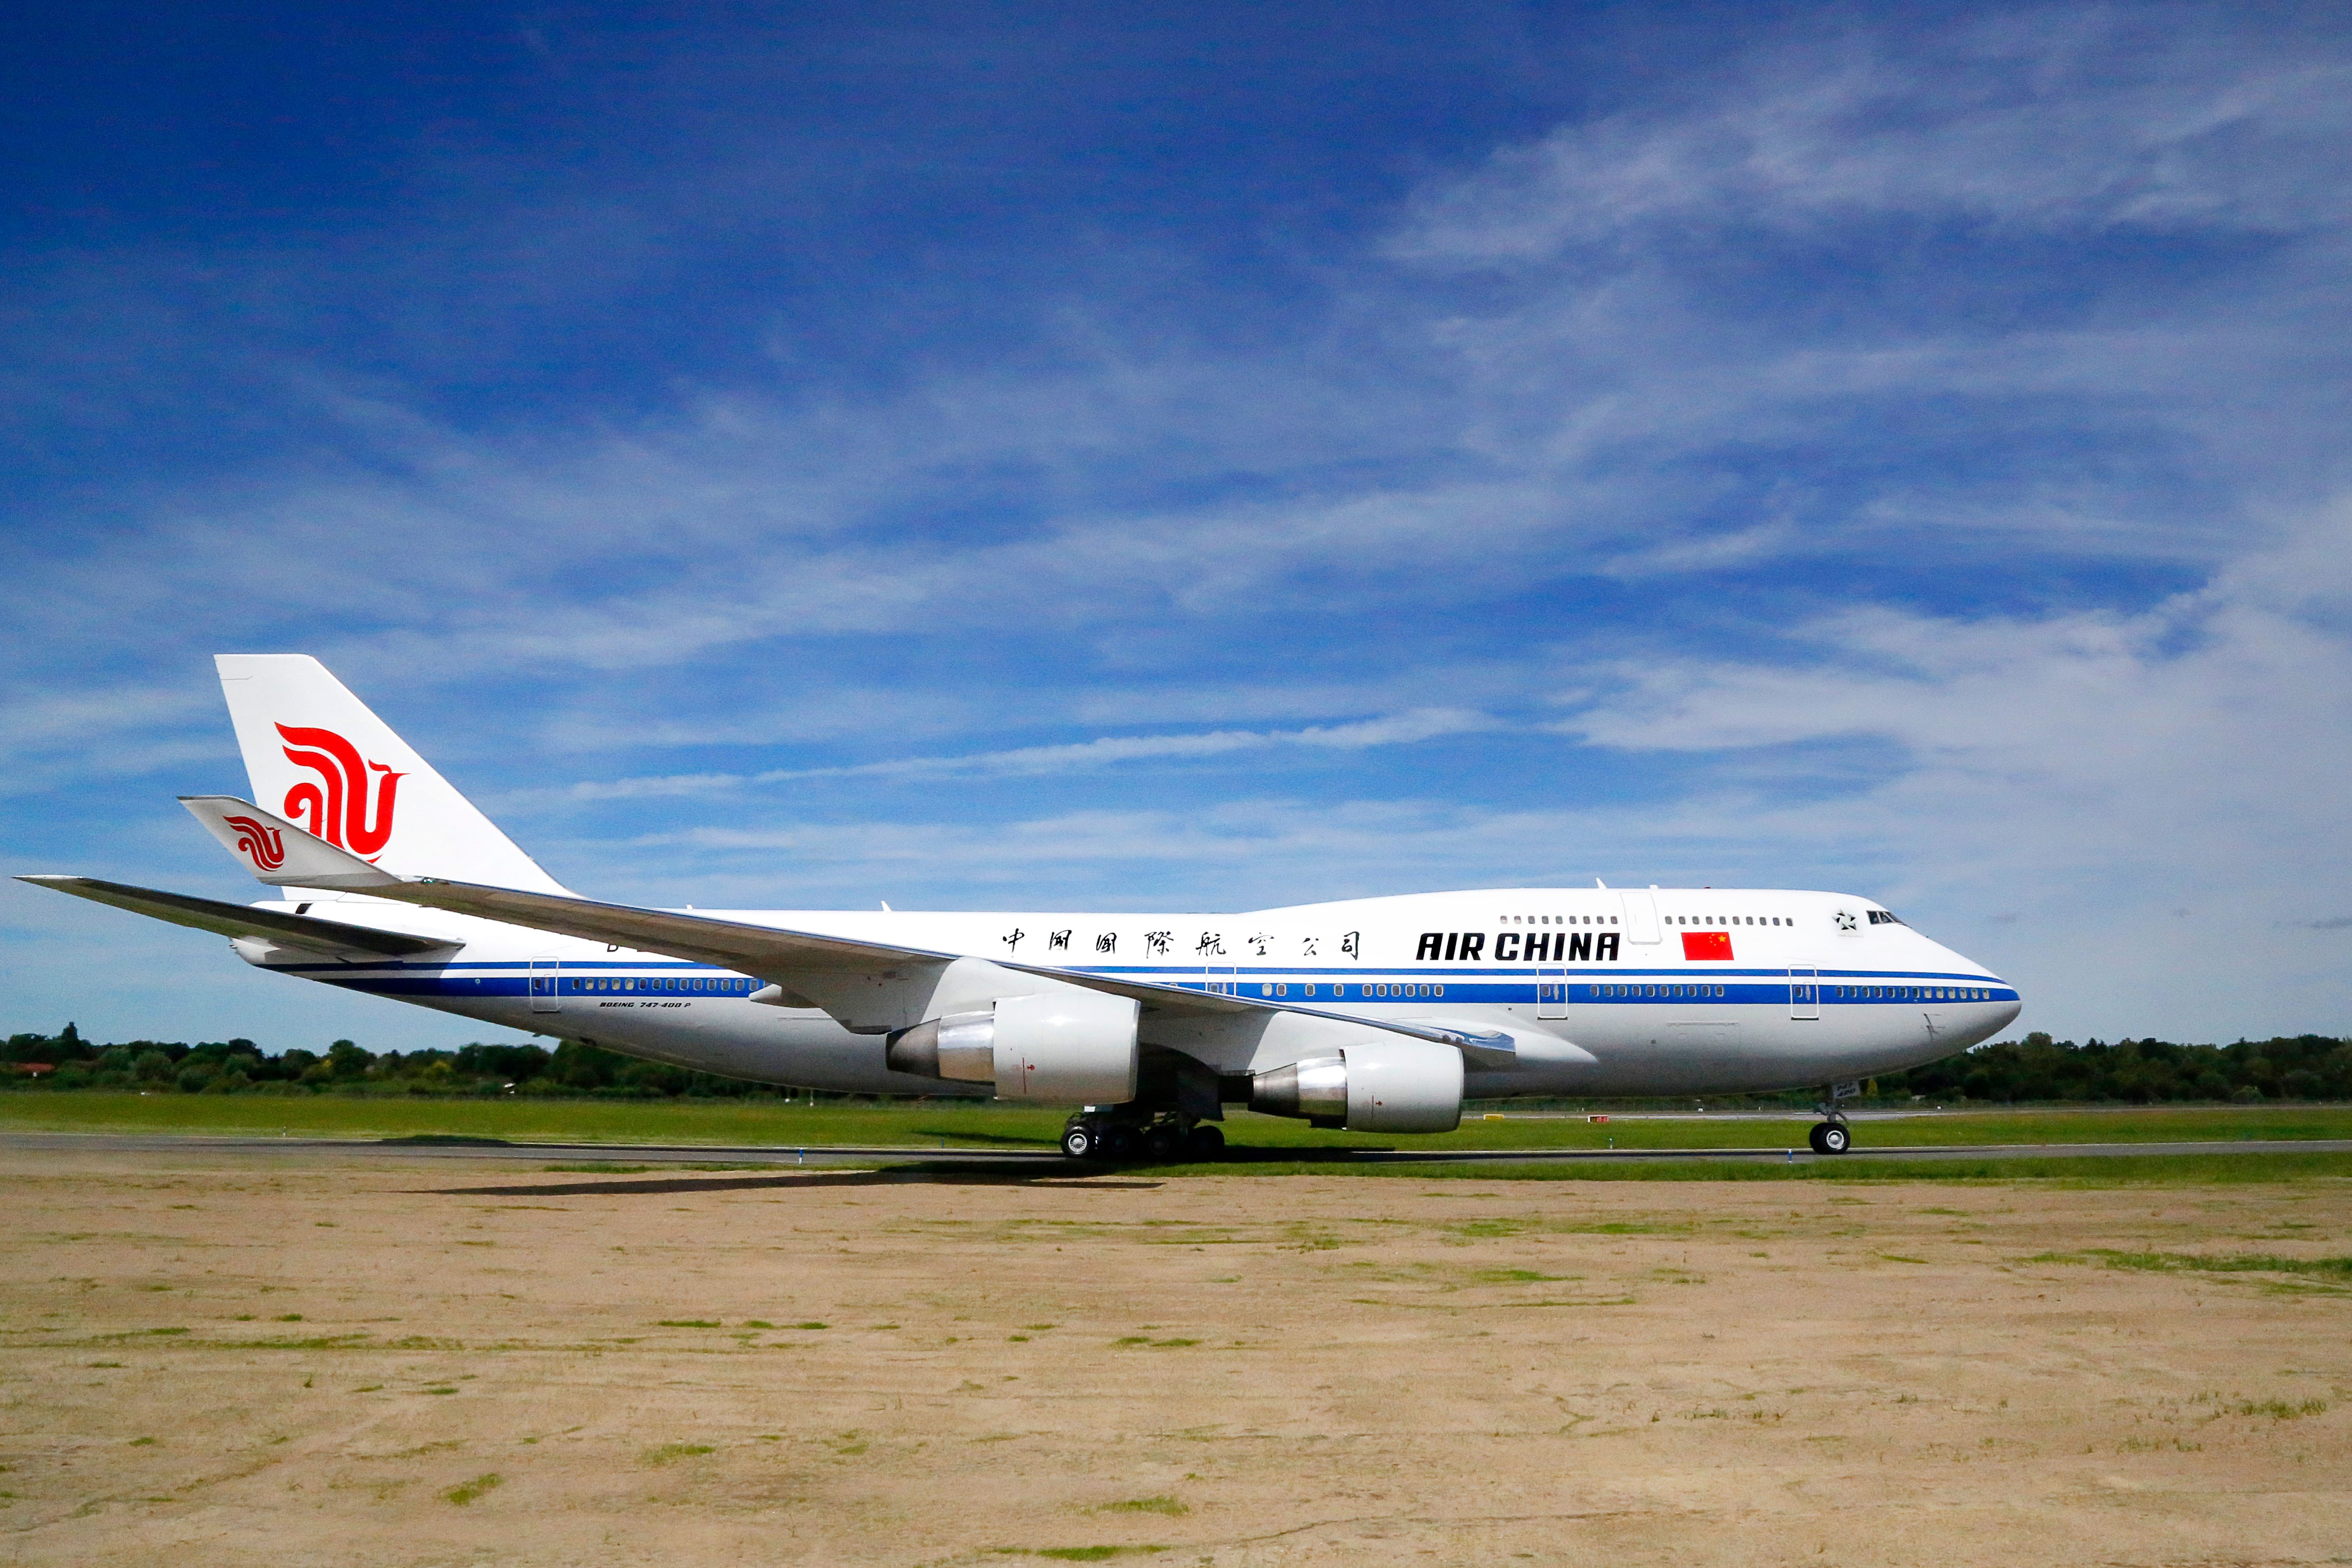 GettyImages-869493102 Air China Boeing 747-400